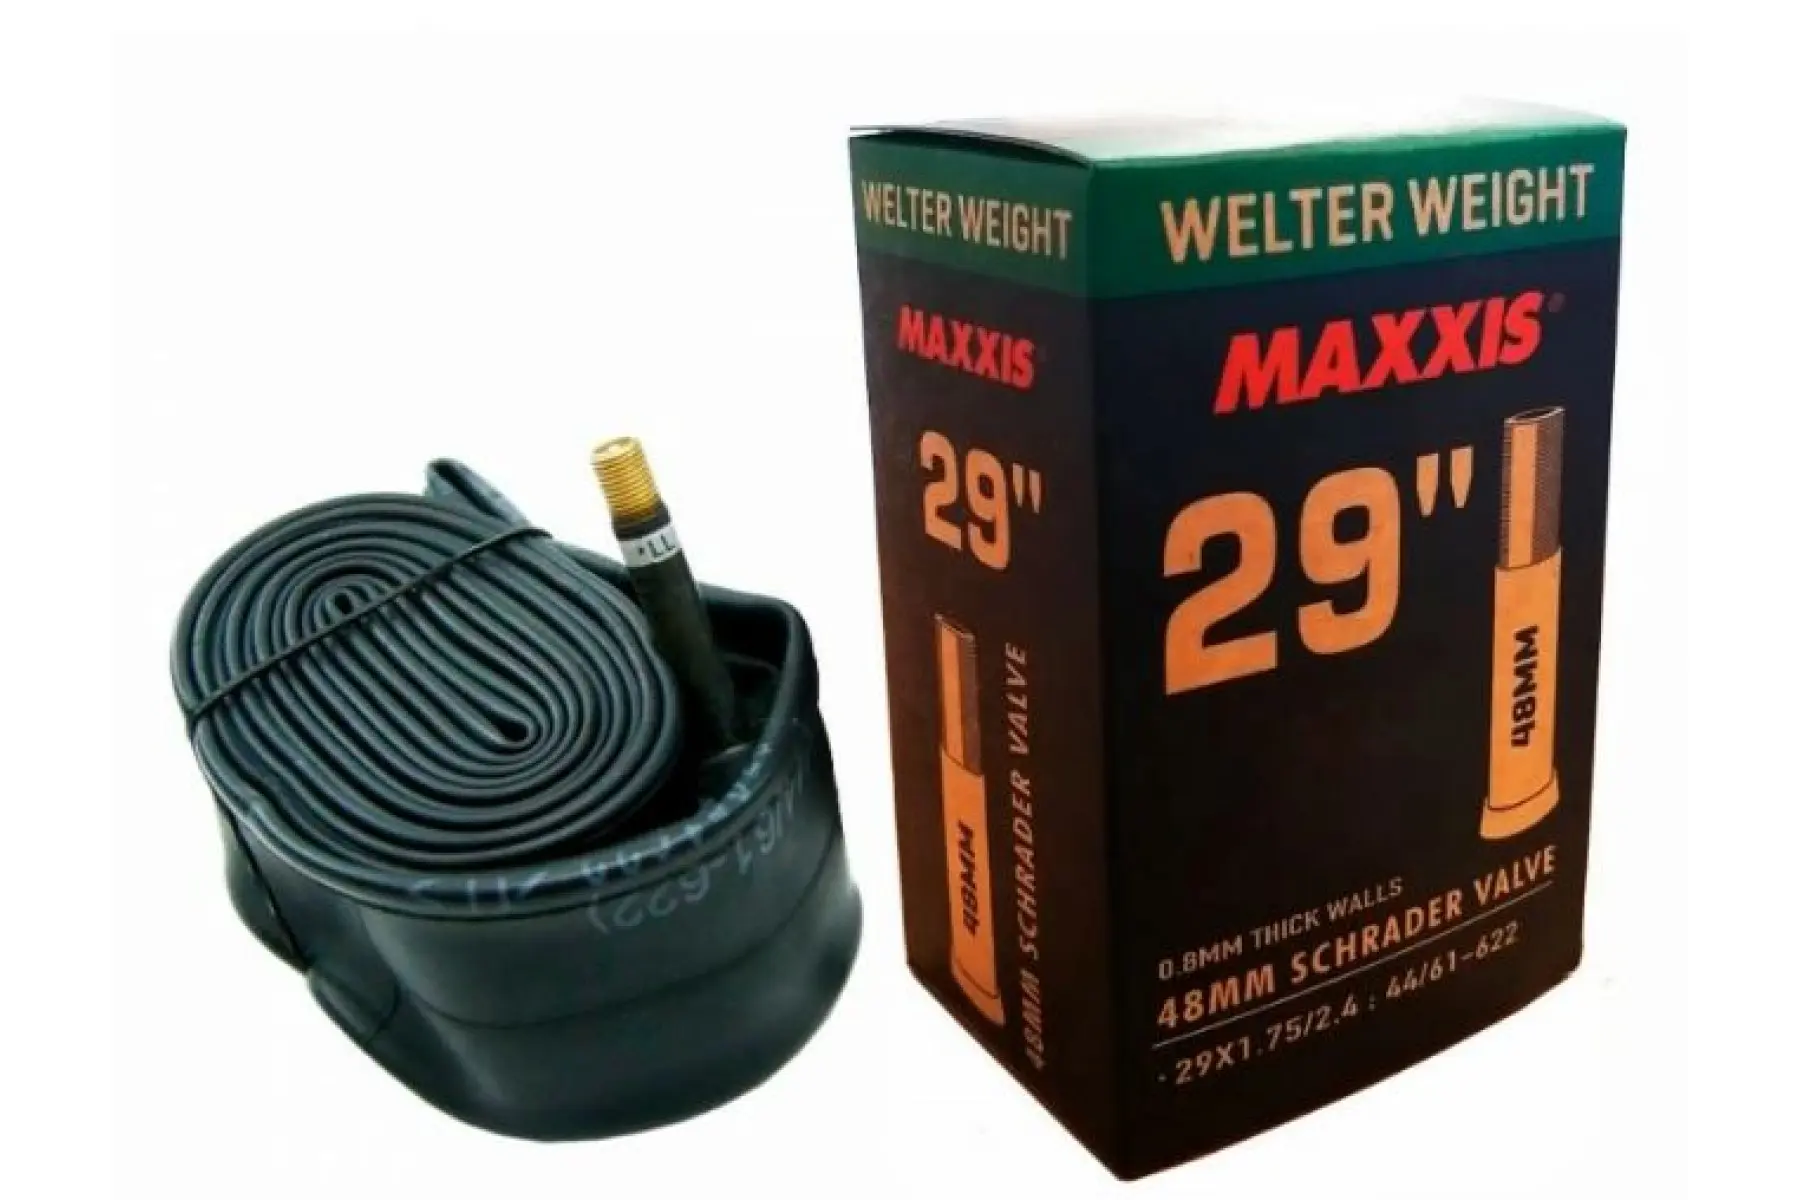 Камера Maxxis Welter Weight 29x1.75/2.4